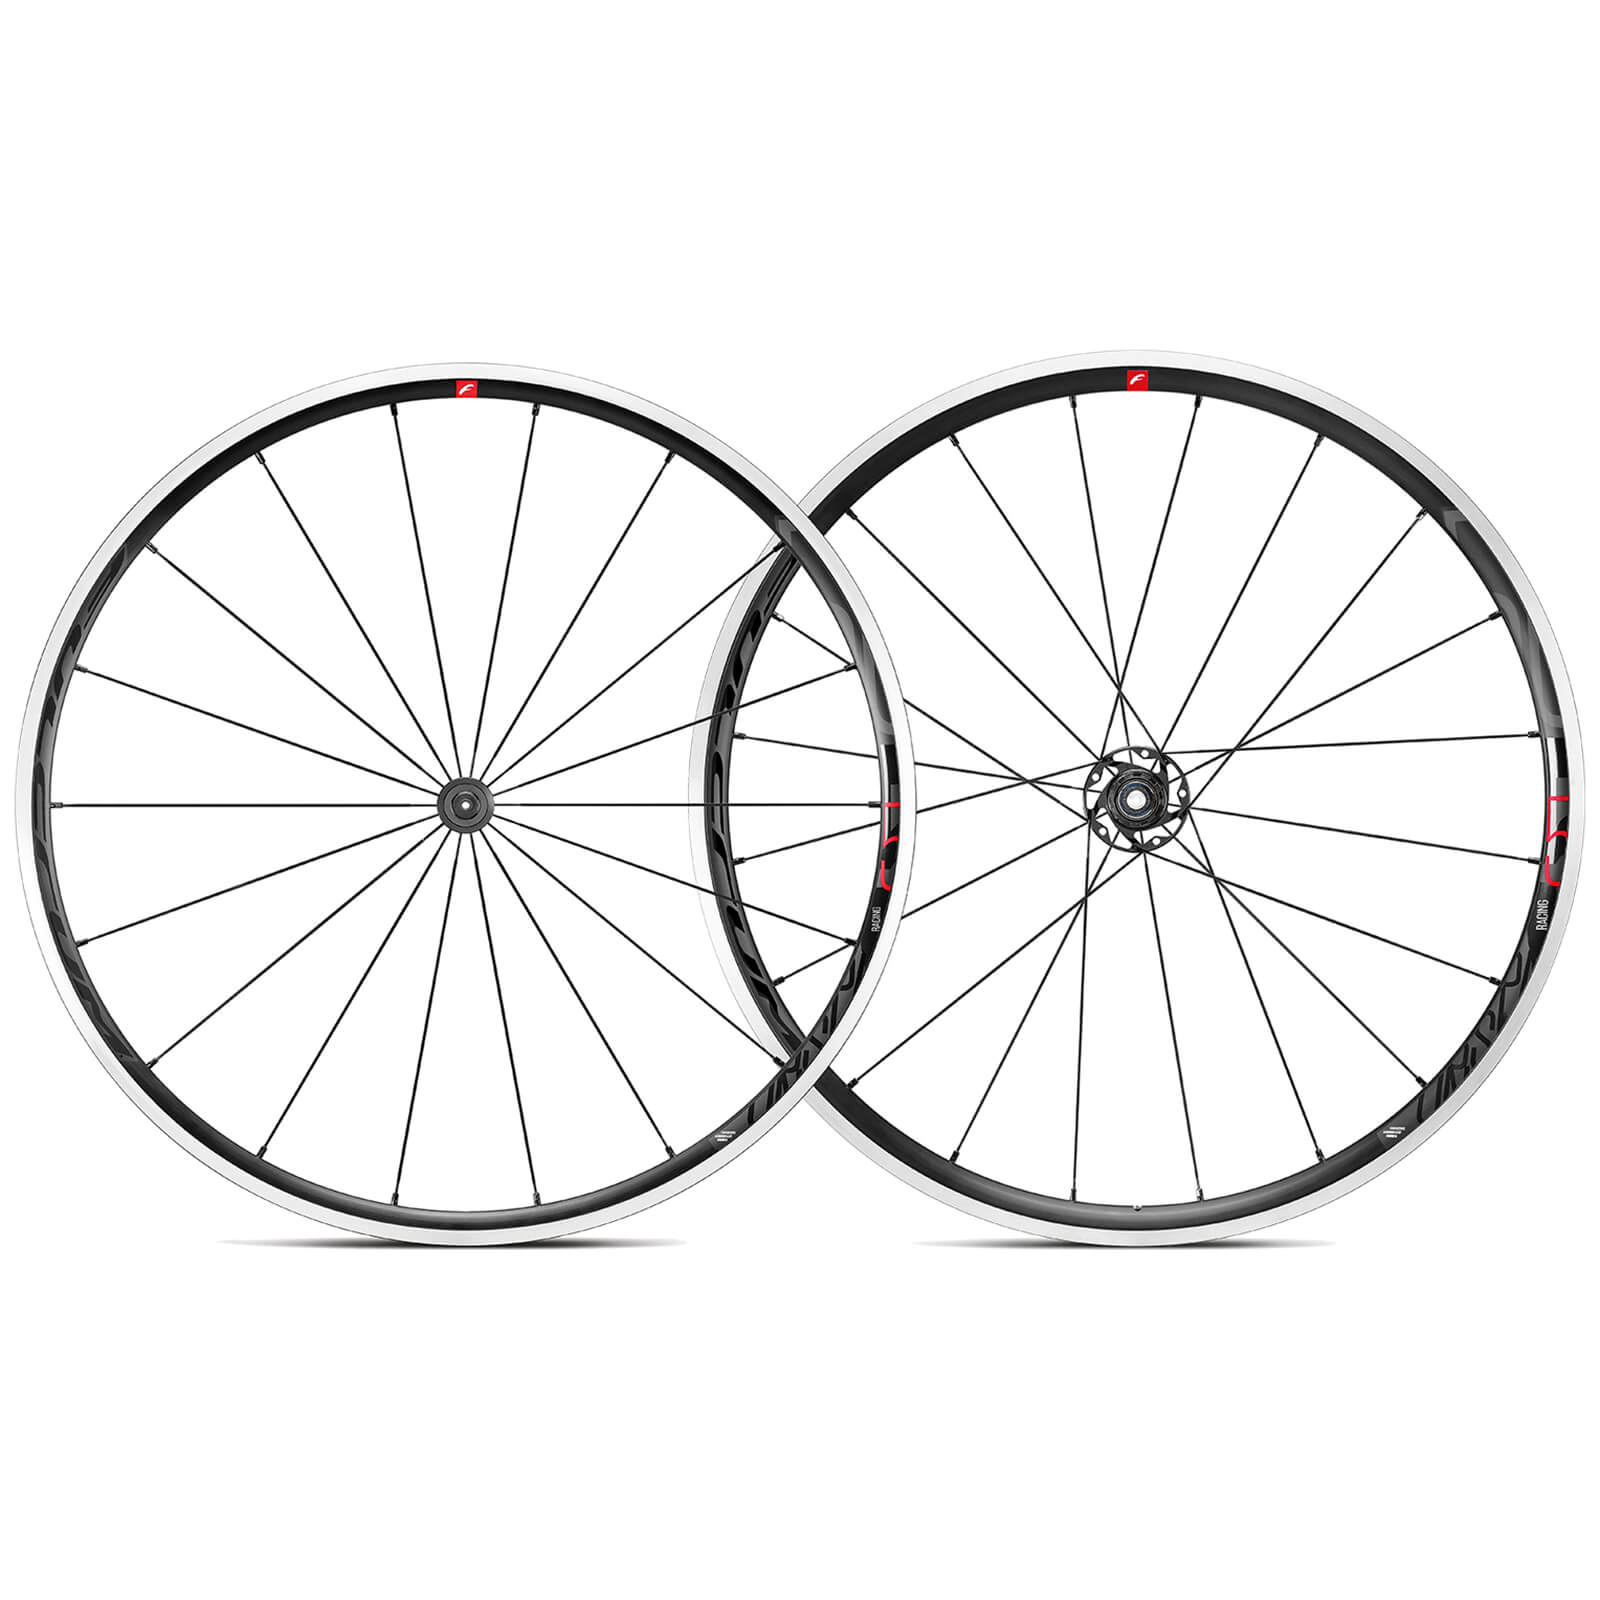 Fulcrum Racing 5 C17 Clincher Wheelset - Campagnolo